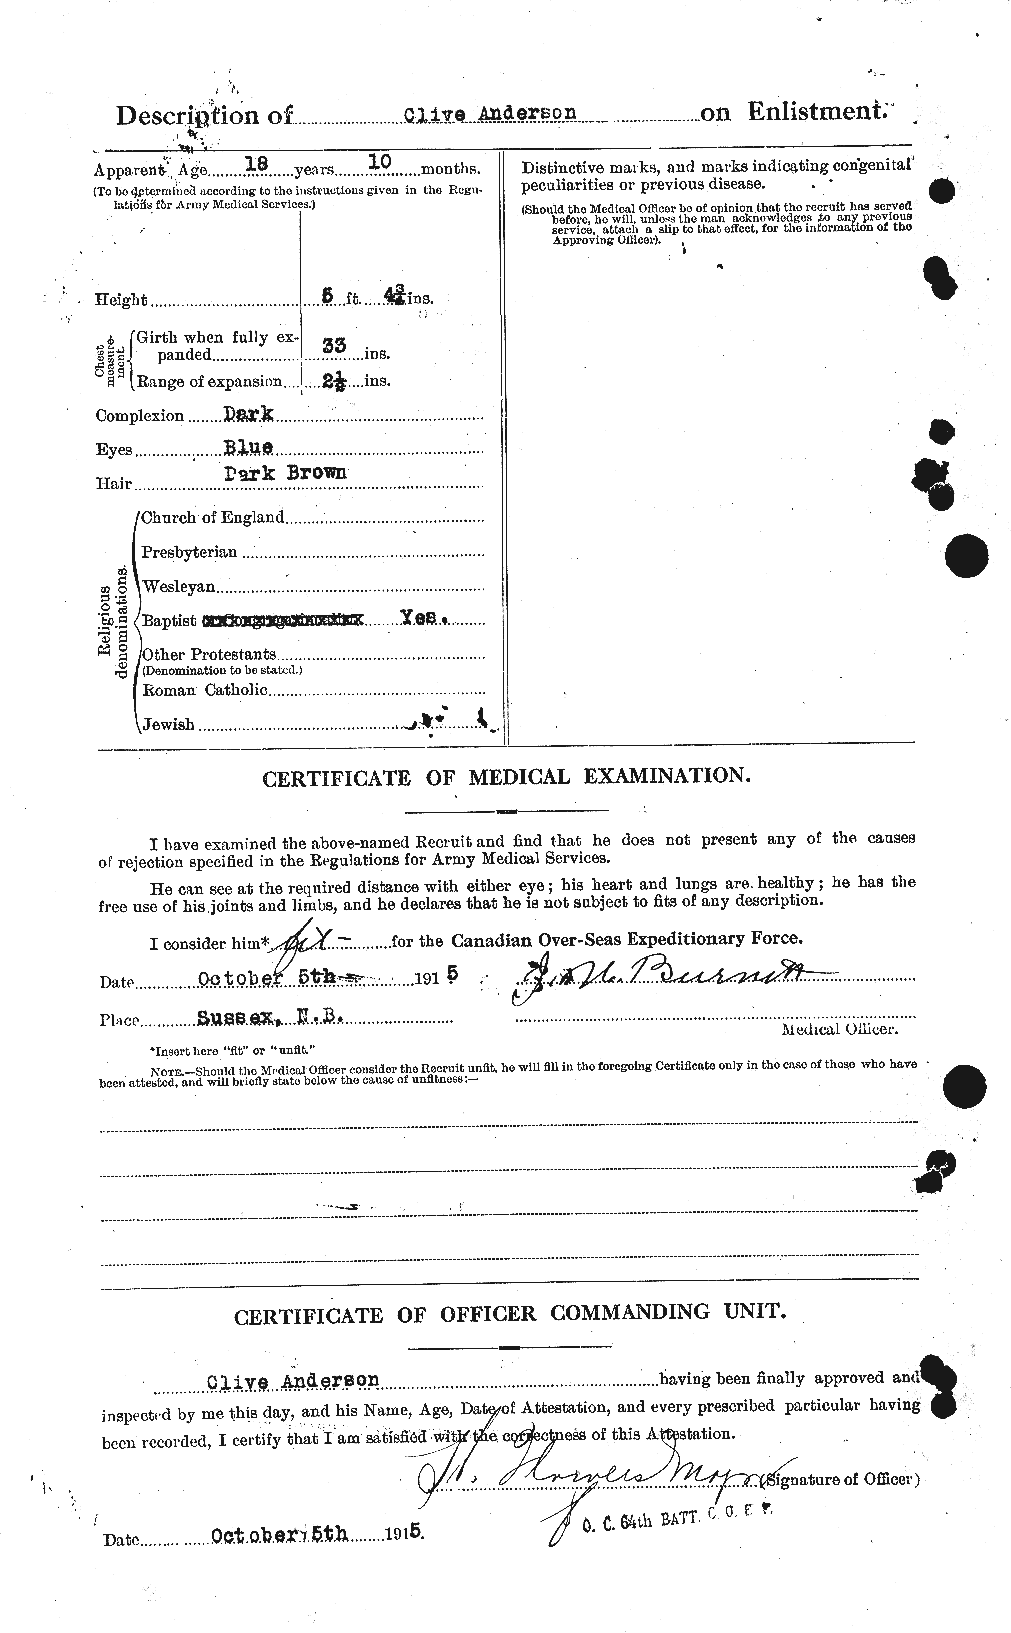 Personnel Records of the First World War - CEF 210058b